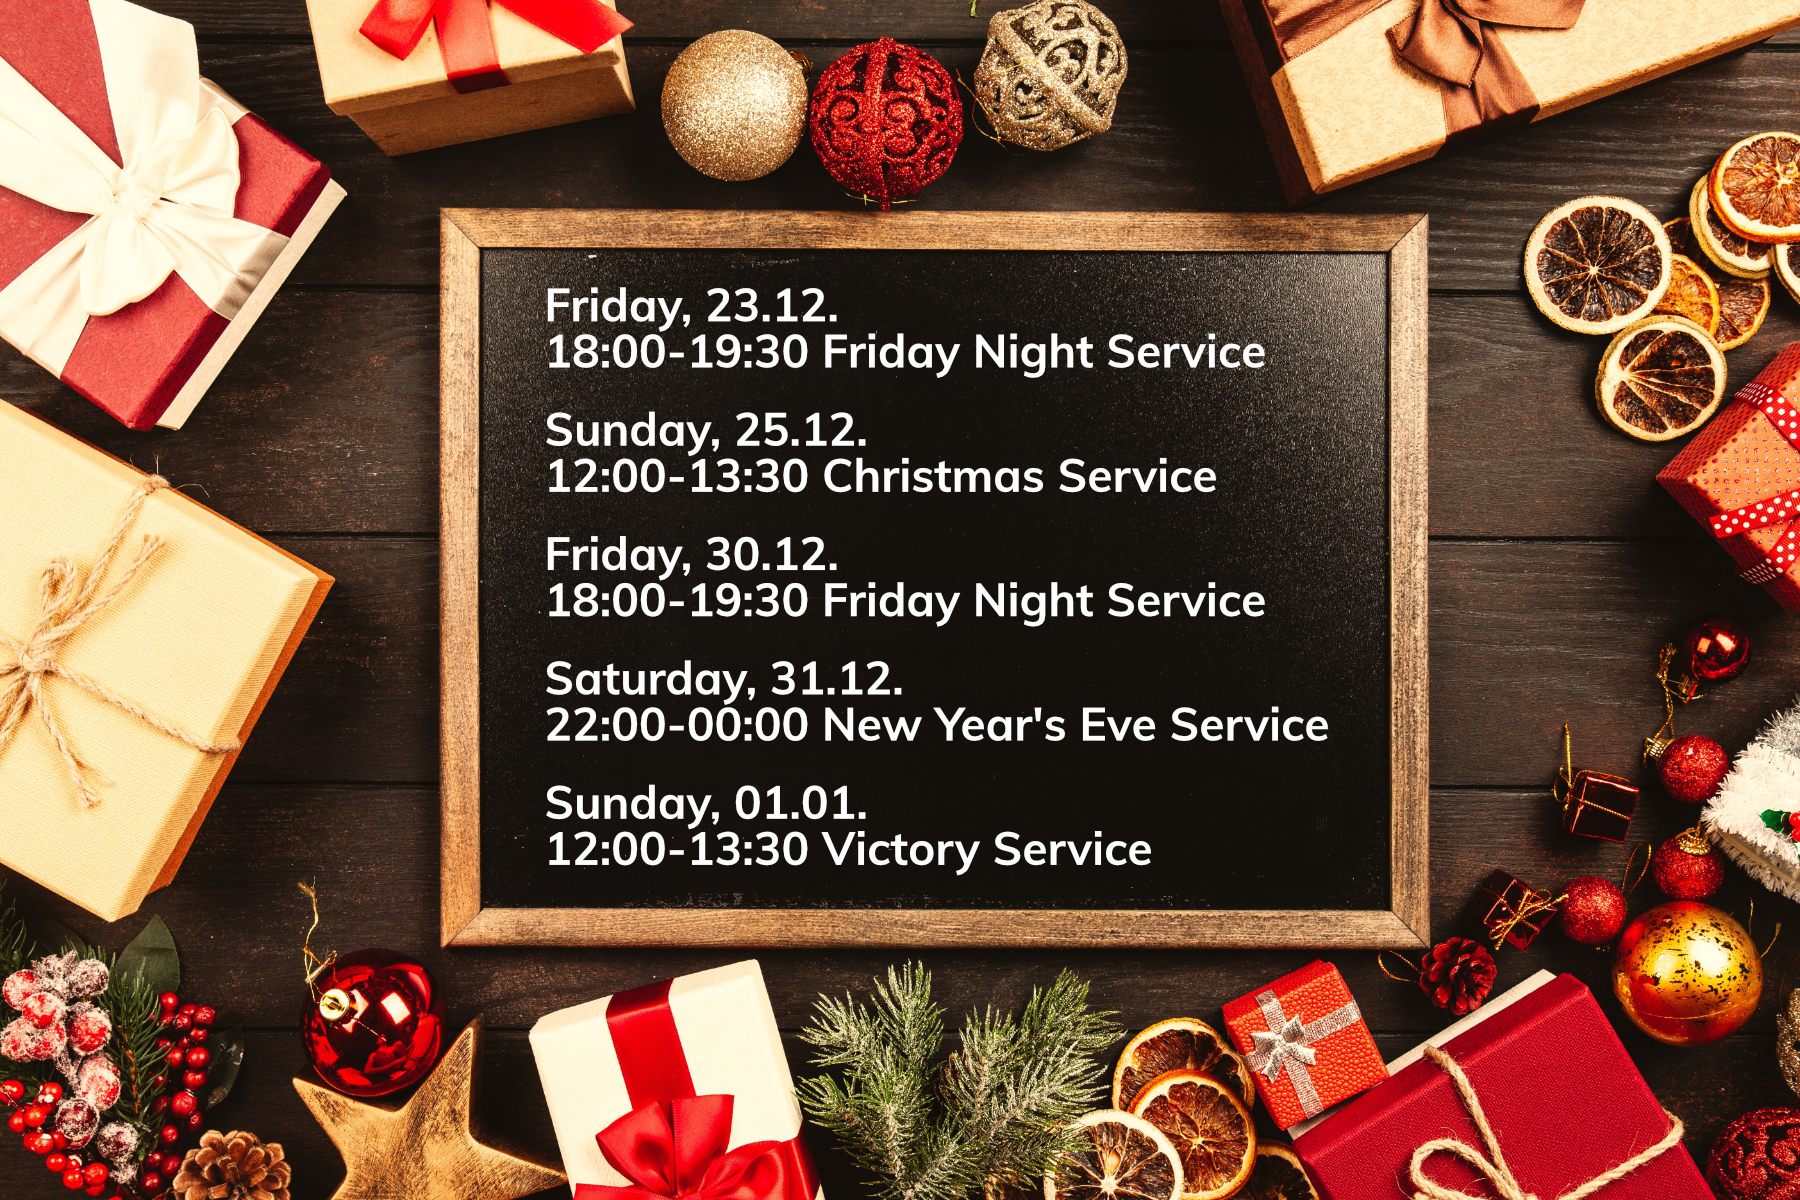 Holiday Service times. Open to read.